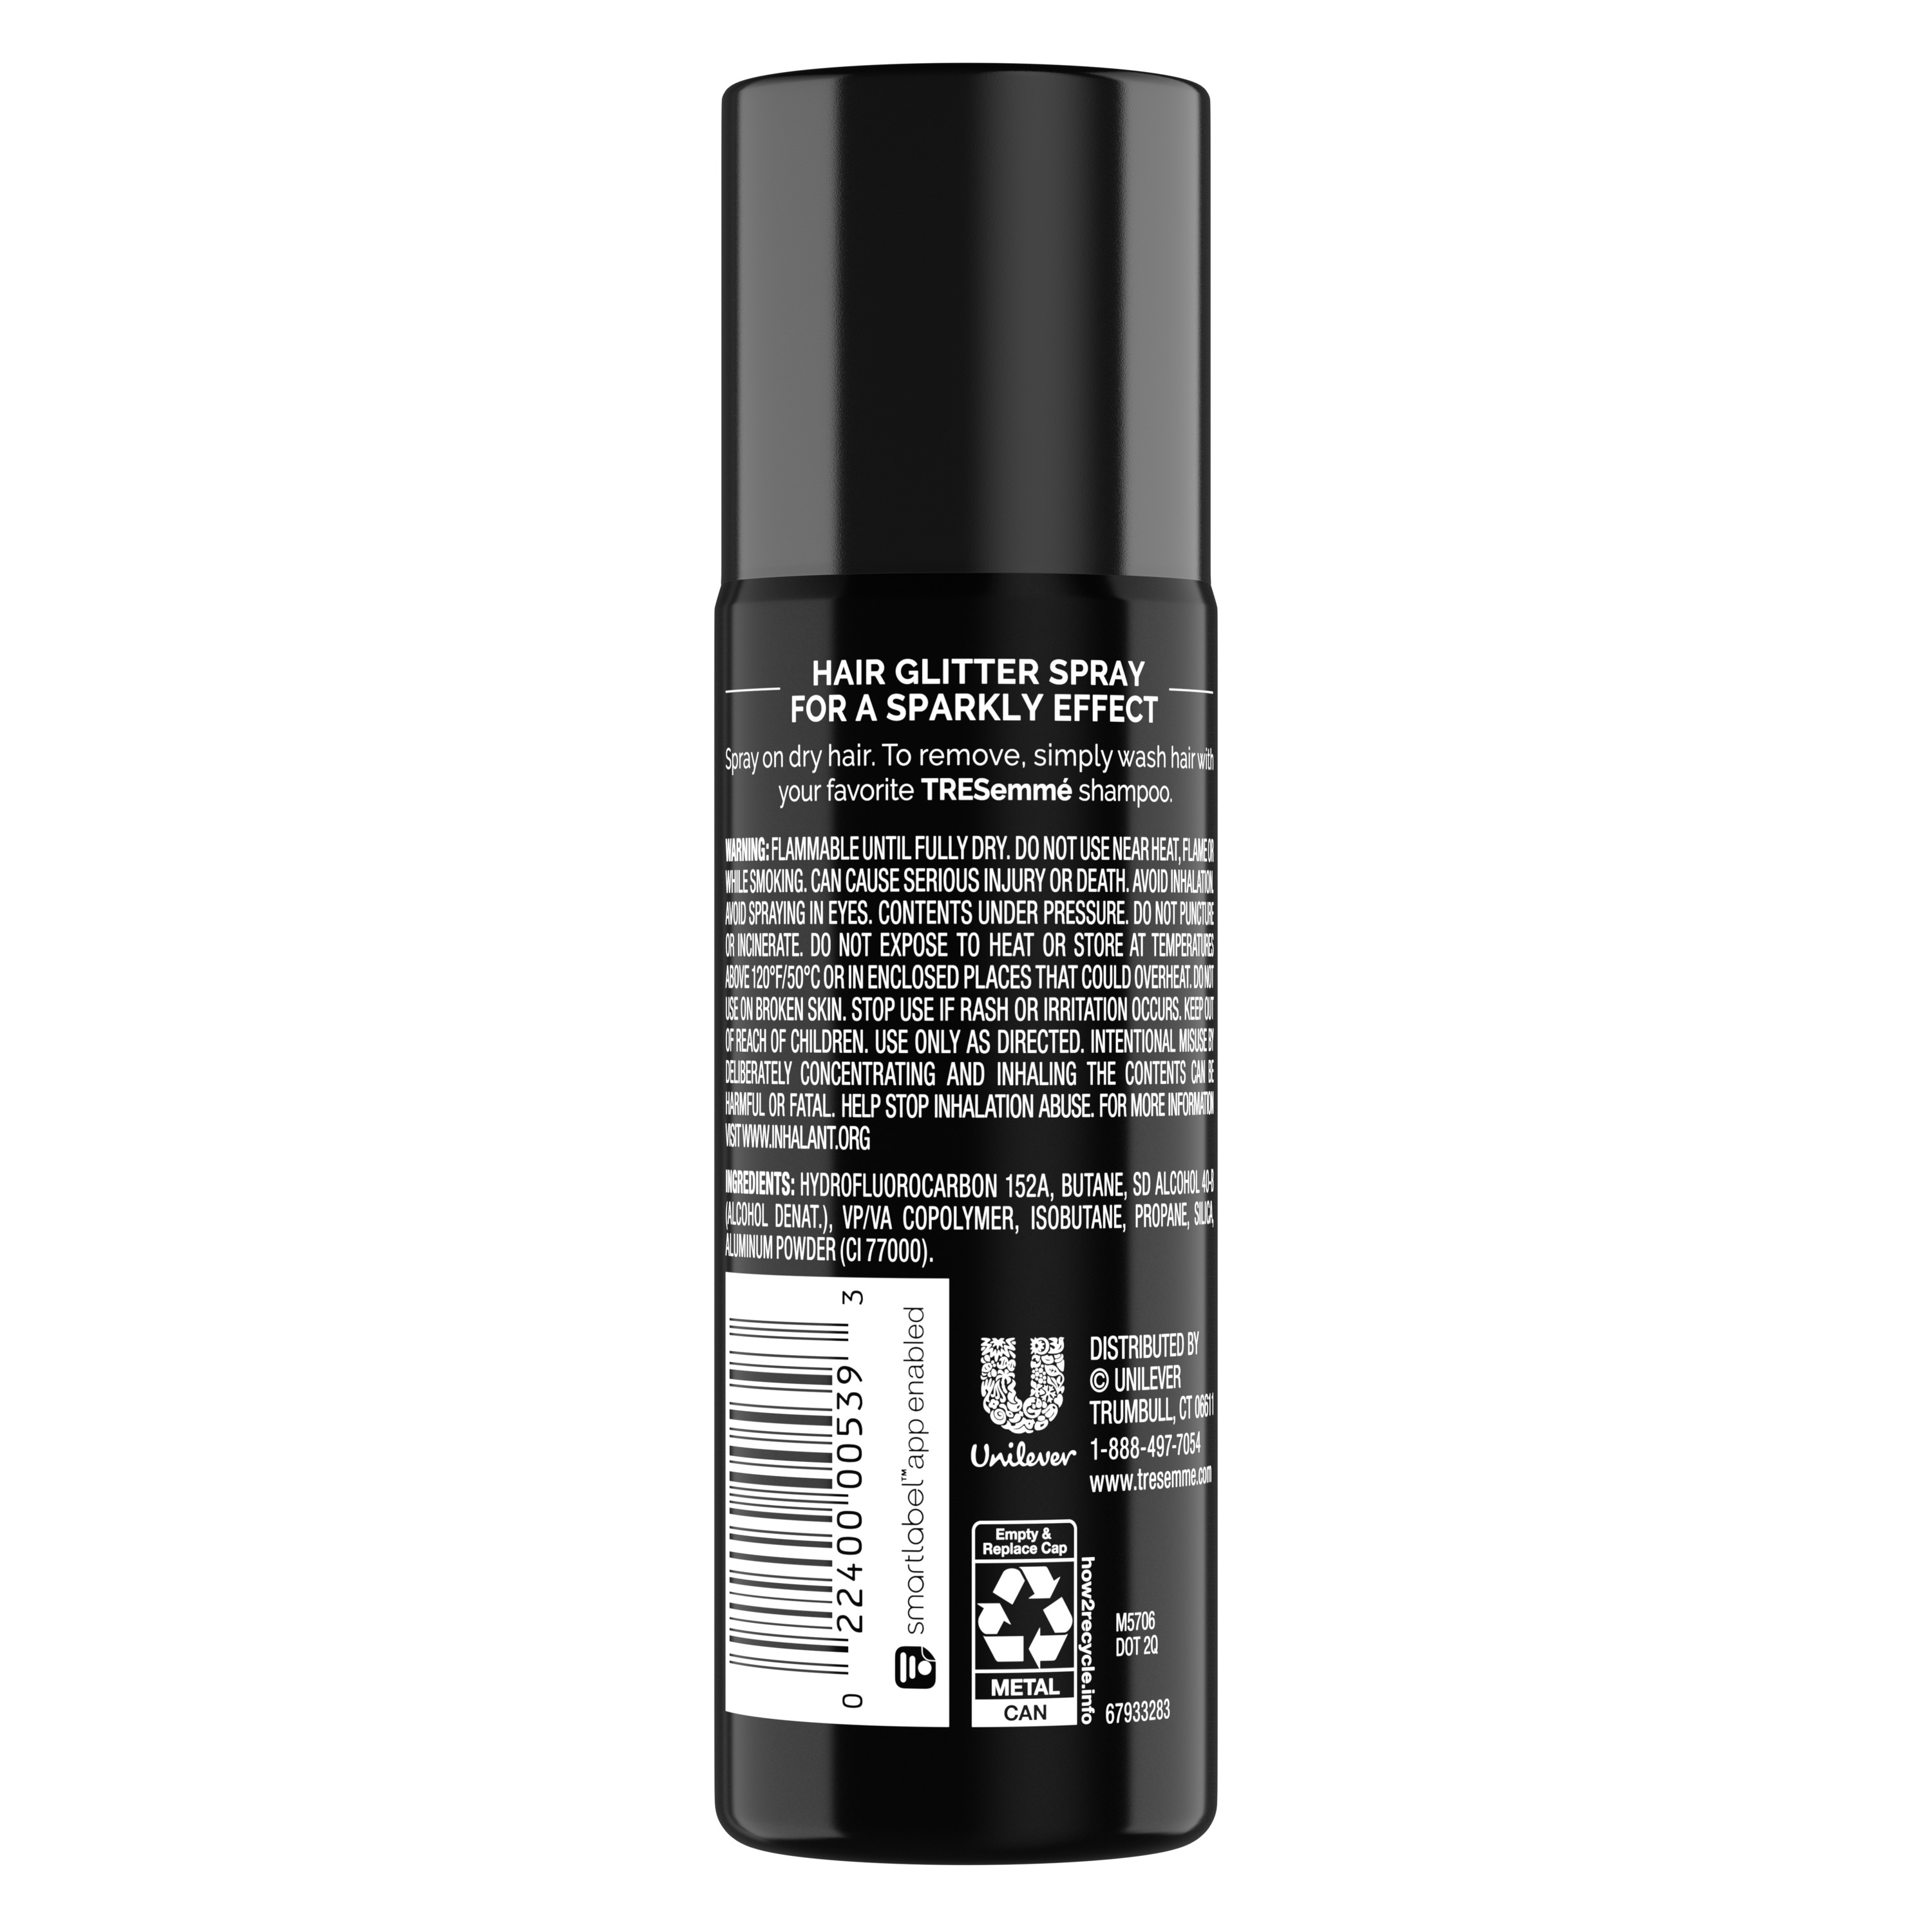 Tresemme Colored Hair Spray Silver 1.8 oz - image 3 of 4